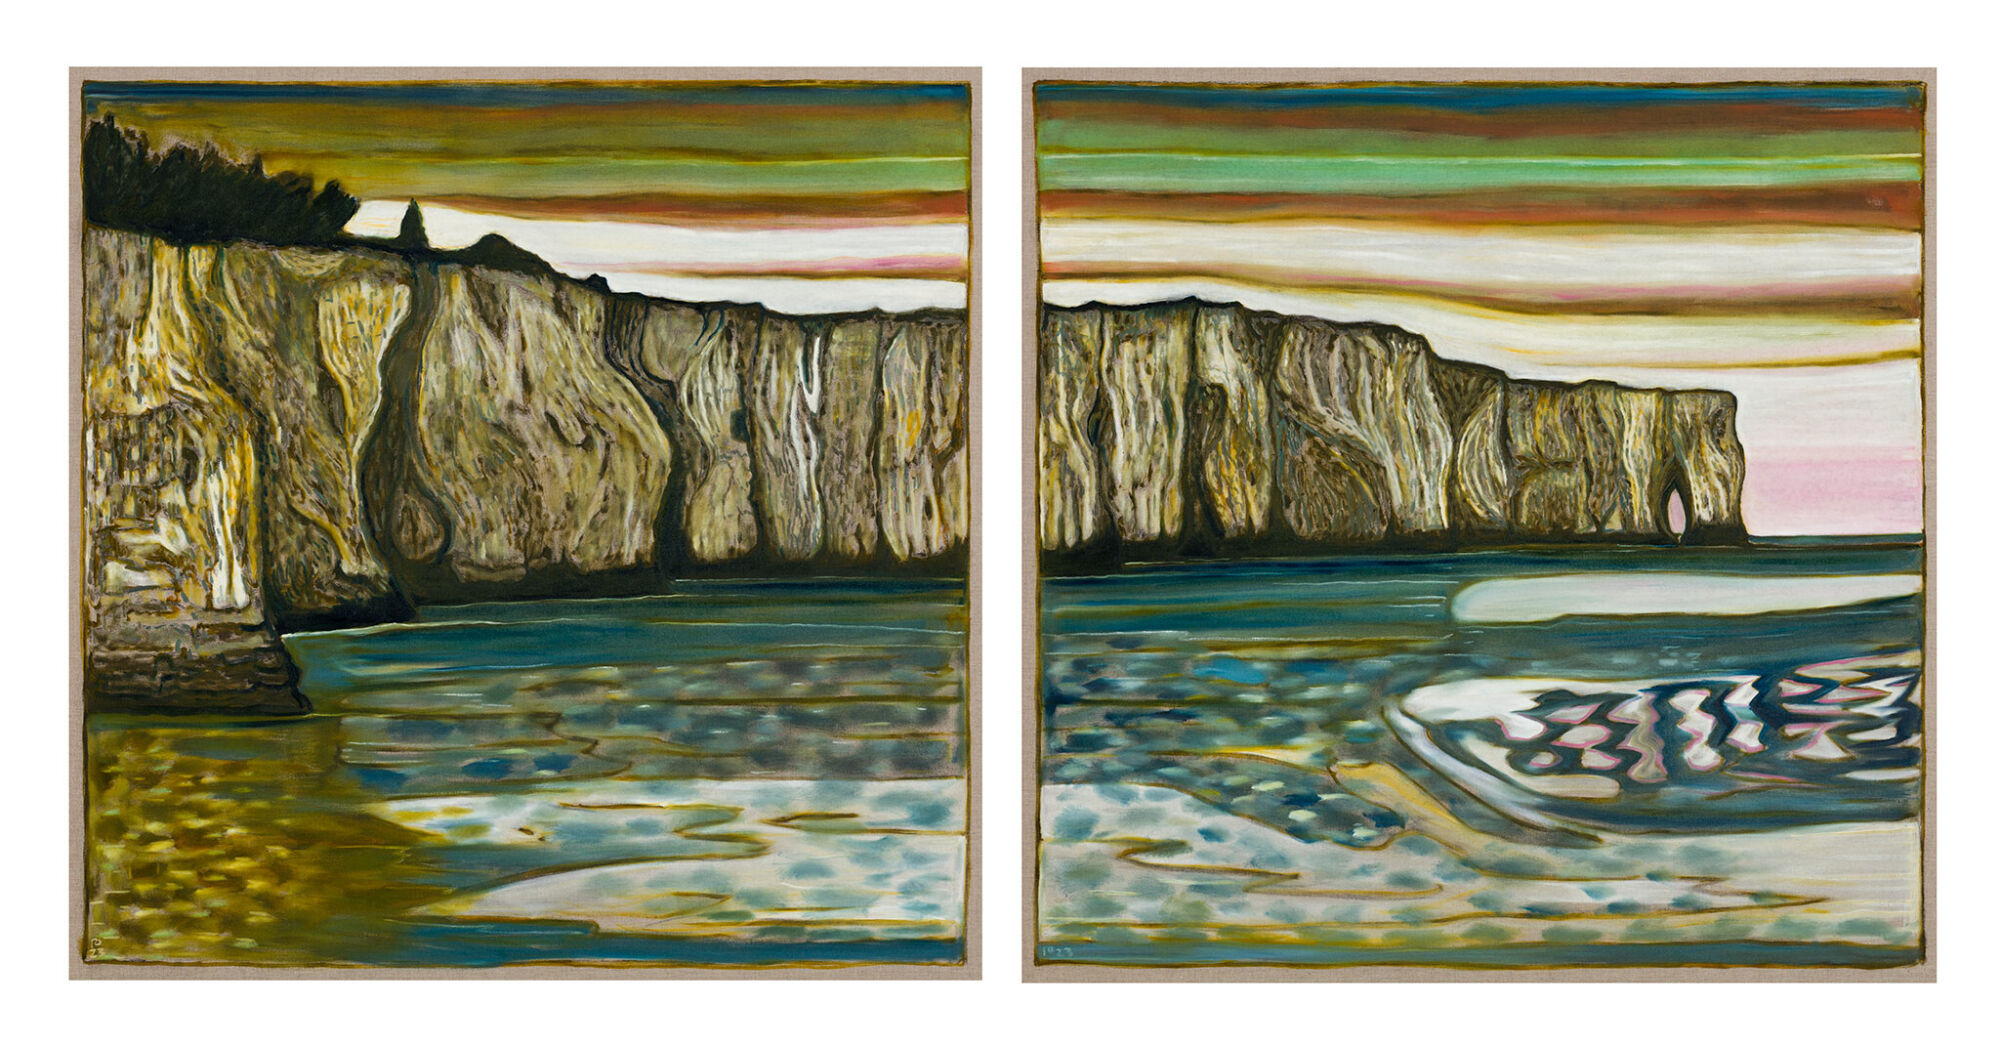 The Wick - Billy Childish, Cliff (diptych) (2023), Oil and charcoal on linen 2 parts, 183 x 183 cm each